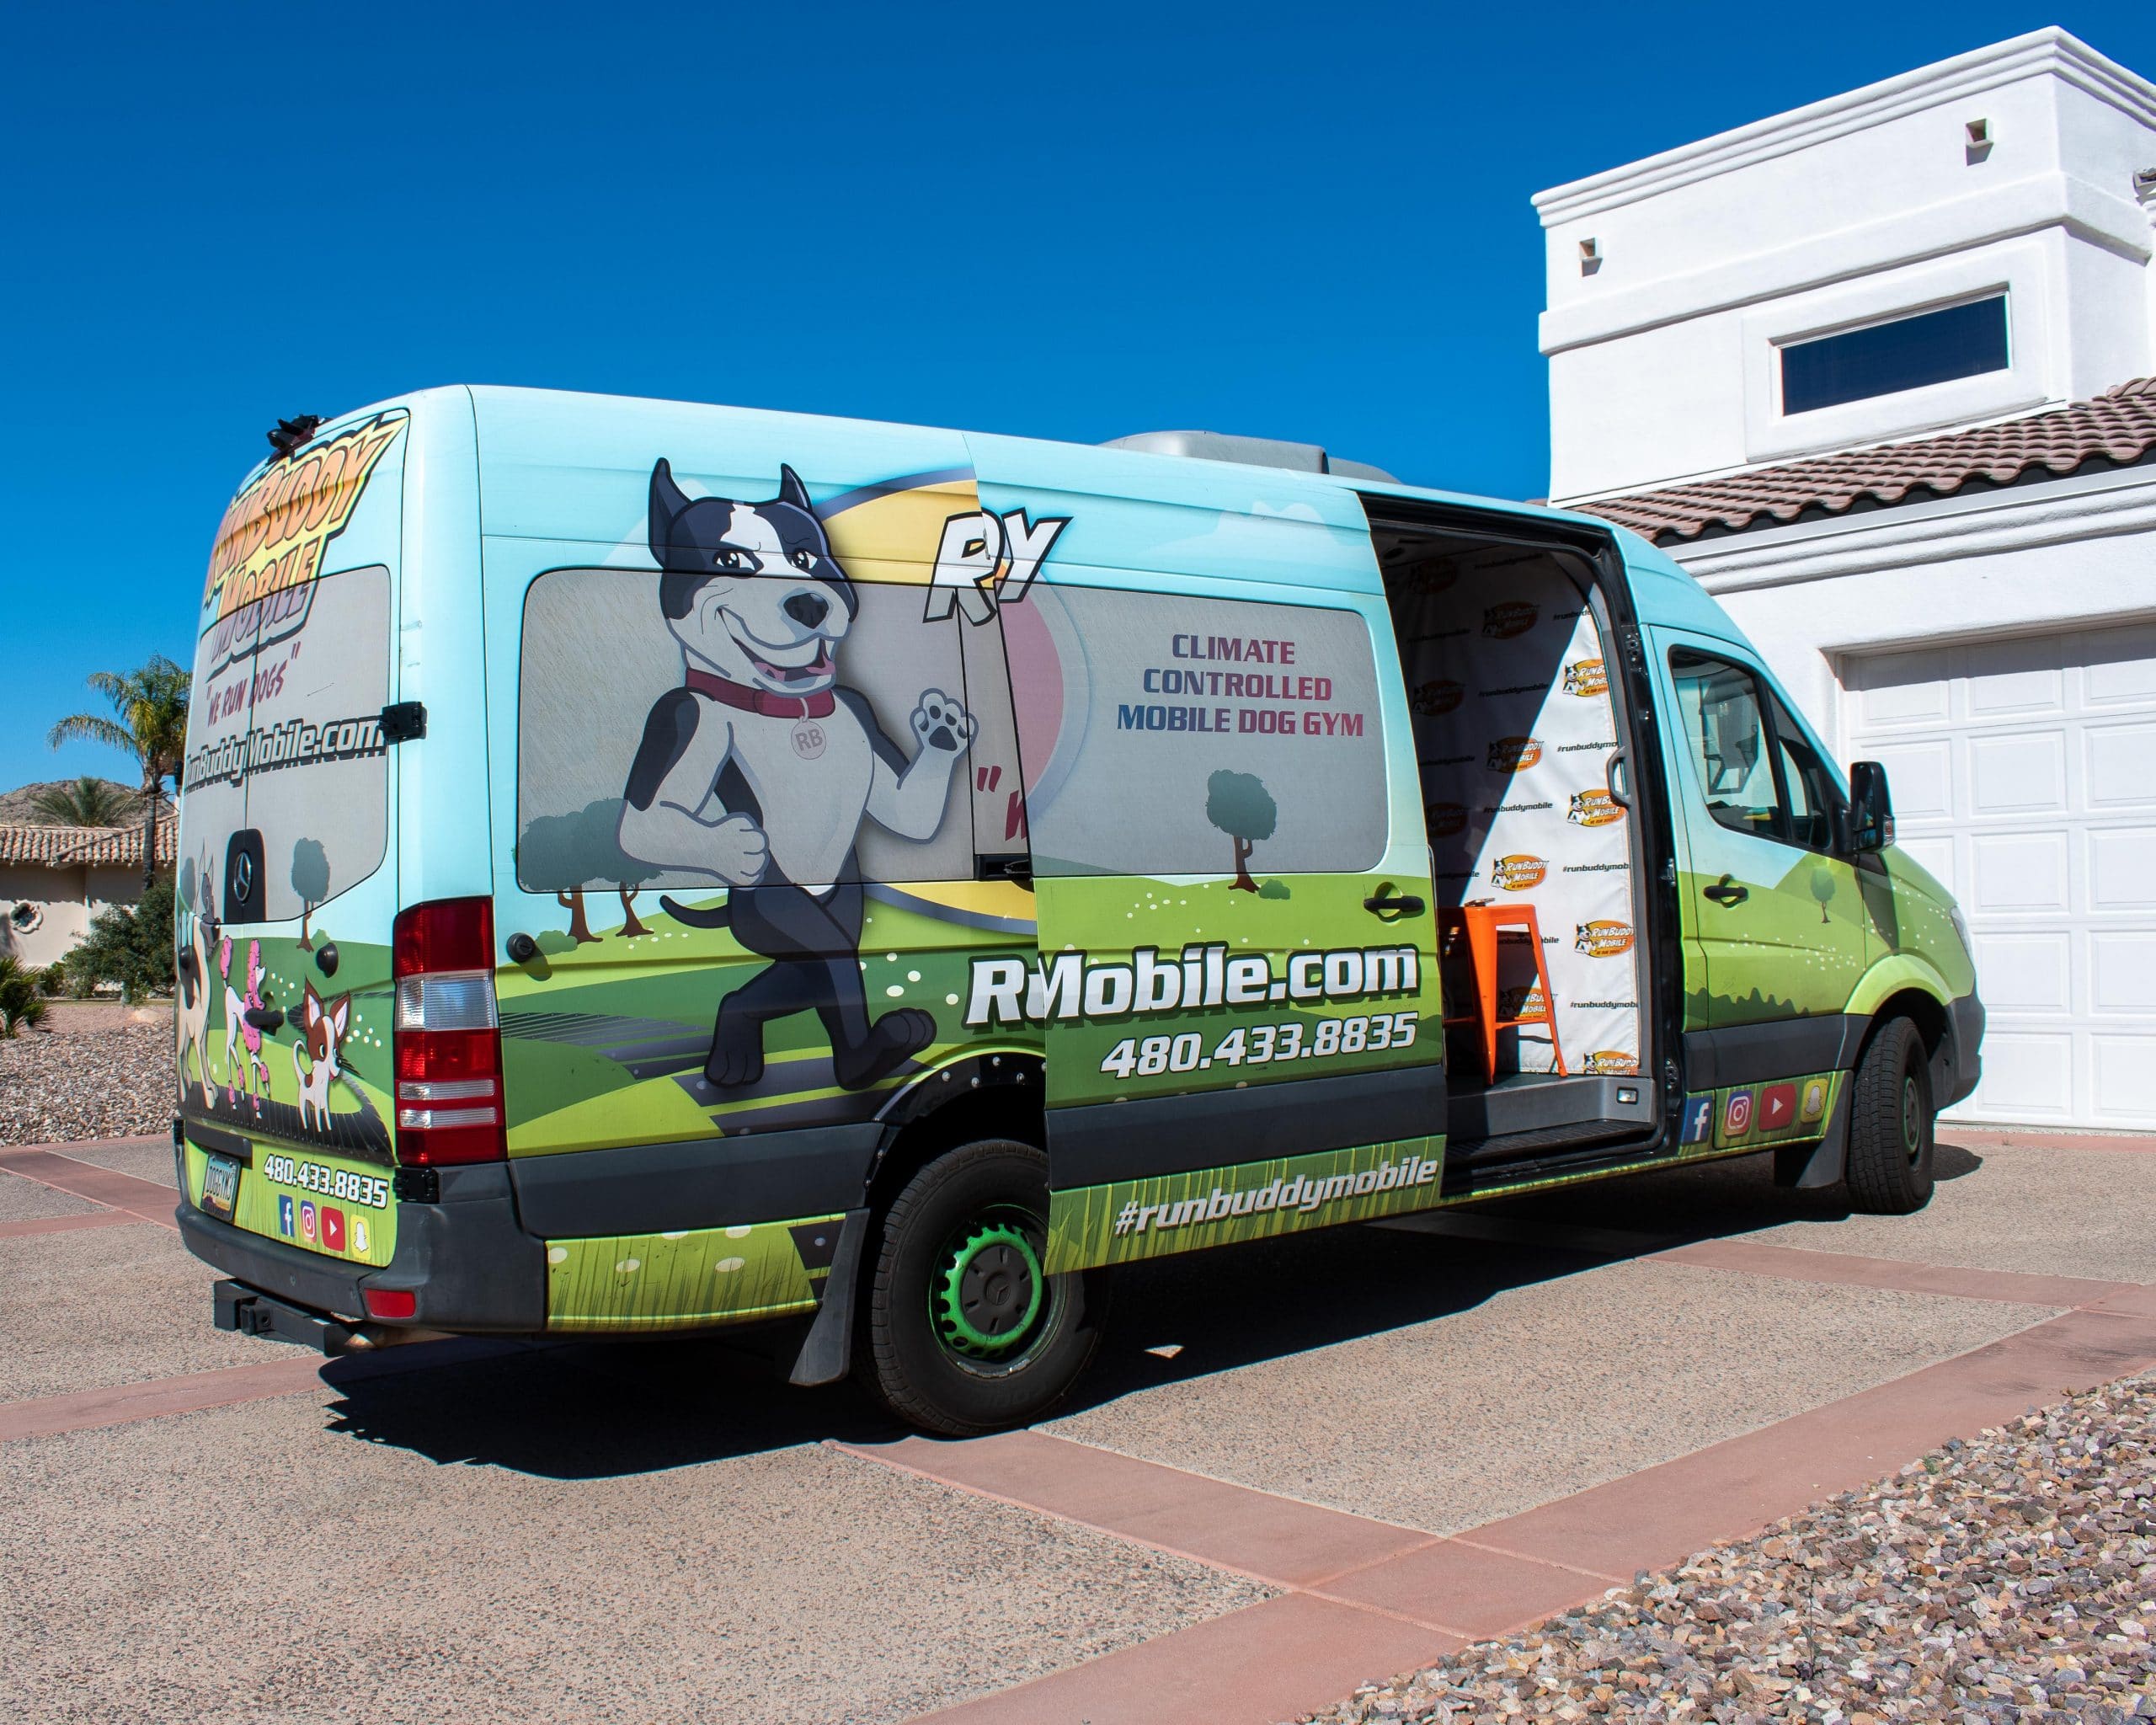 the RunBuddy mobile dog gym van parked and ready for its client.